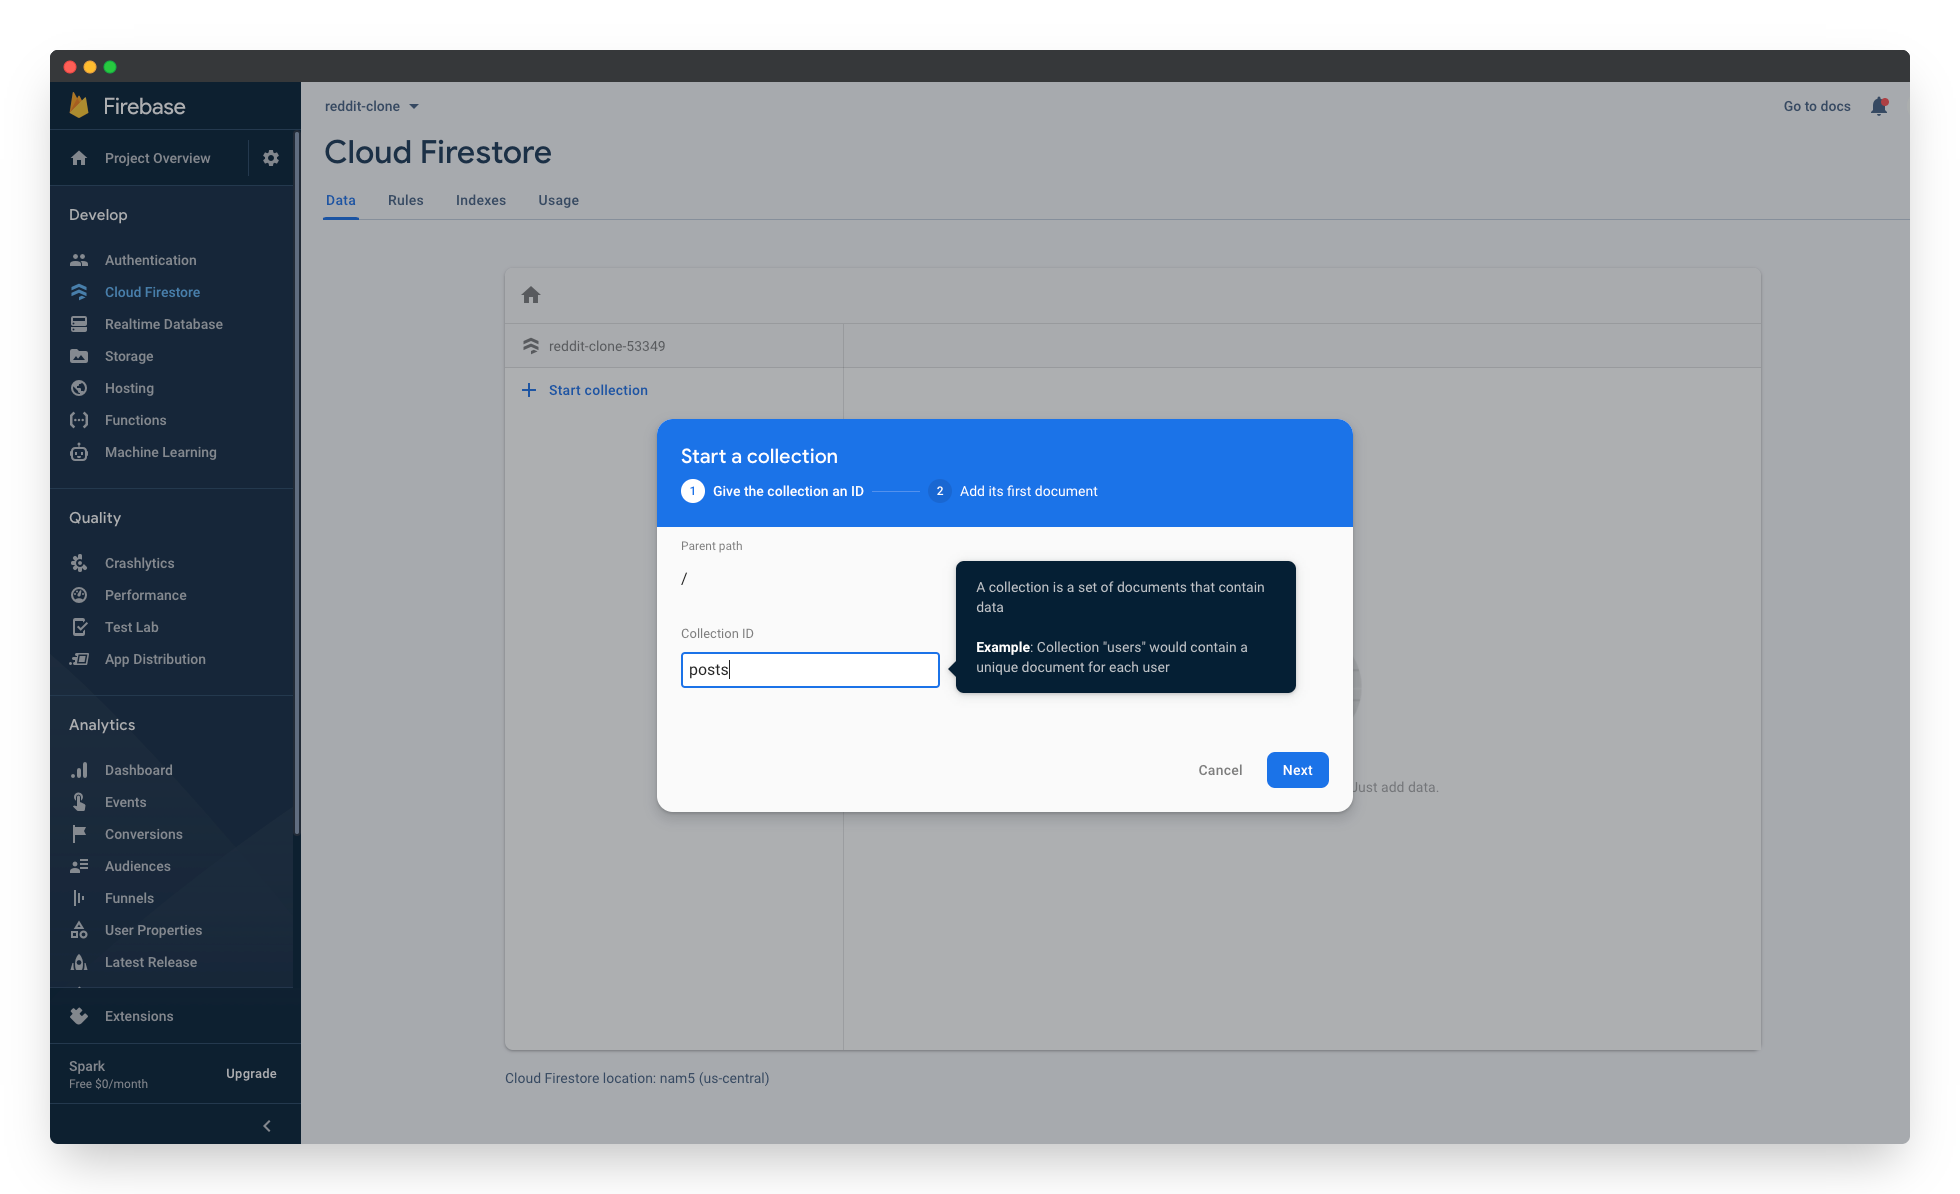 Adding a new collection to the Firebase Cloud Firestore:Step 2